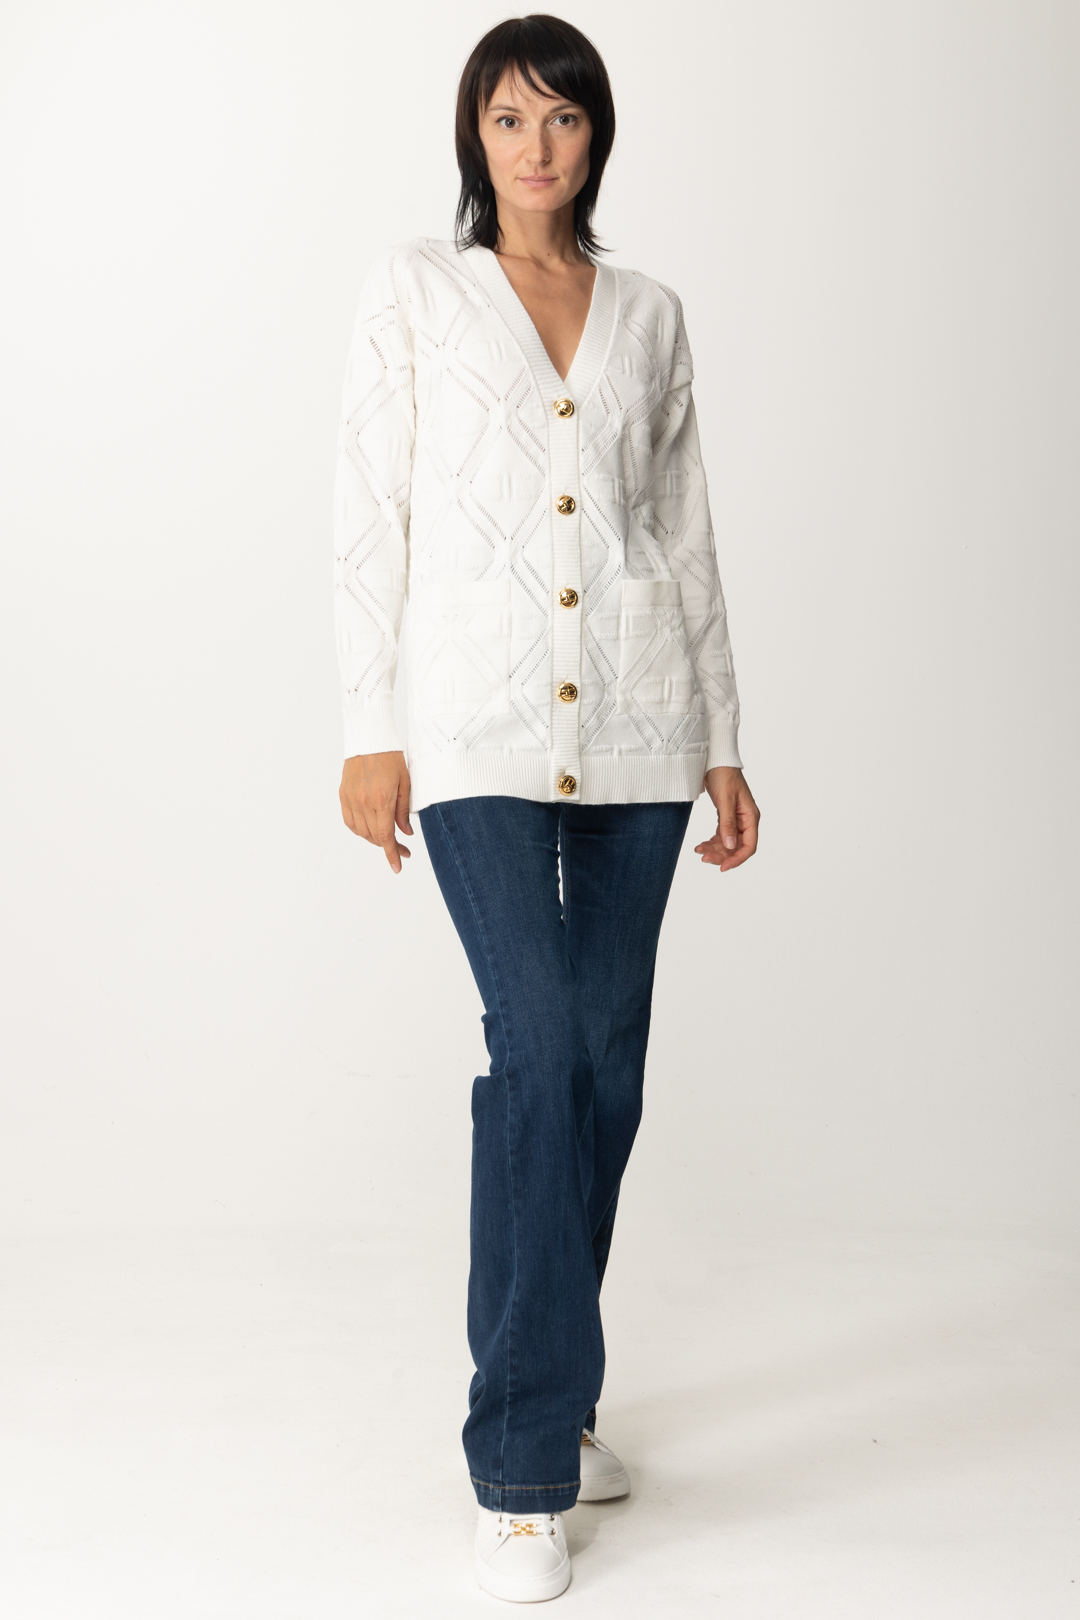 Preview: Elisabetta Franchi Oversized cardigan in lace stitch knit Avorio